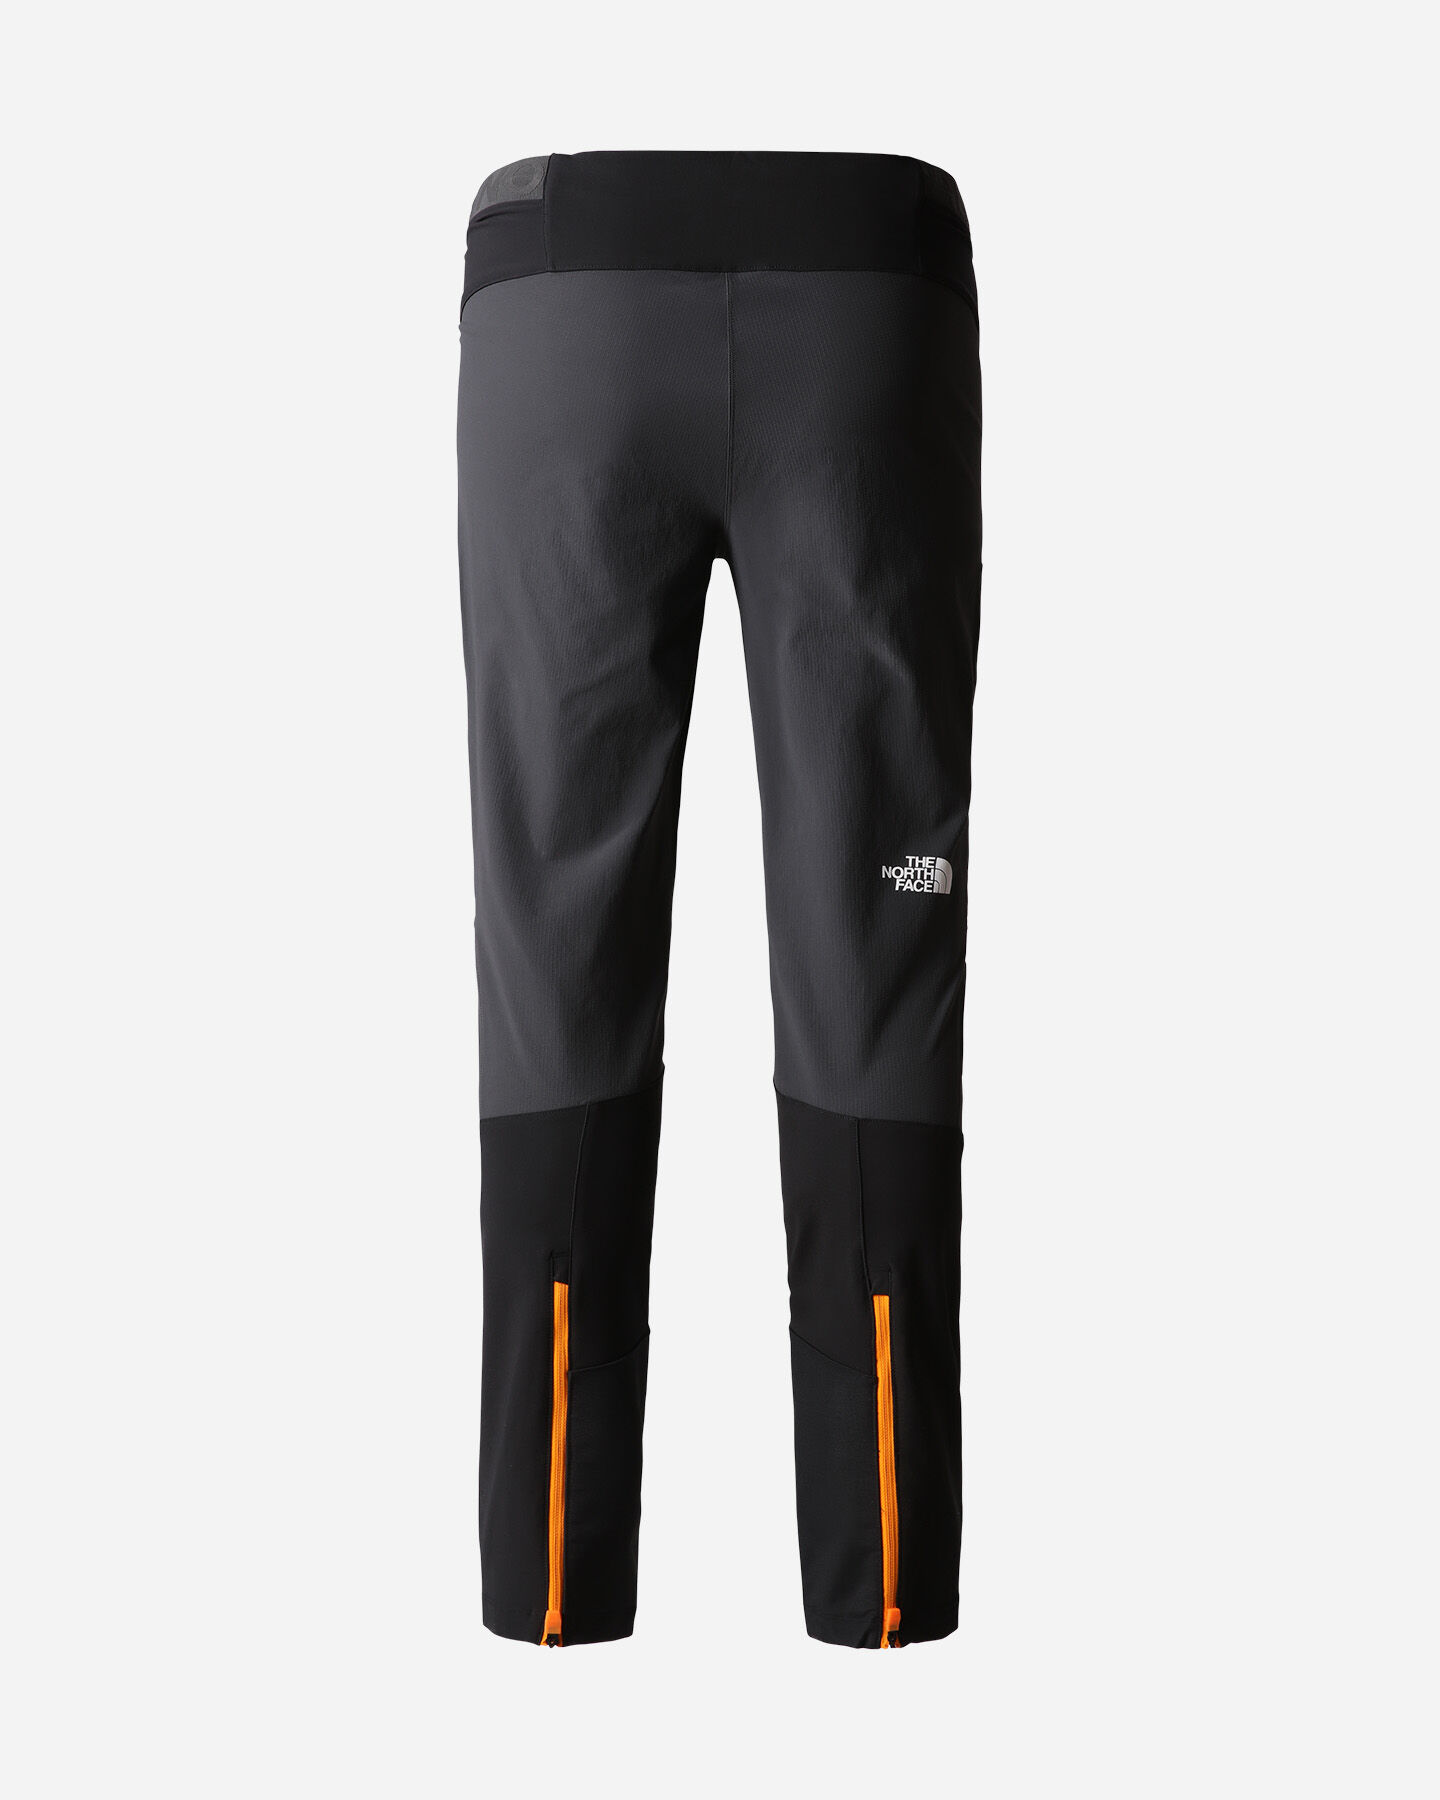  Pantalone outdoor THE NORTH FACE DAWN TURN M S5476172|902|REG28 scatto 1